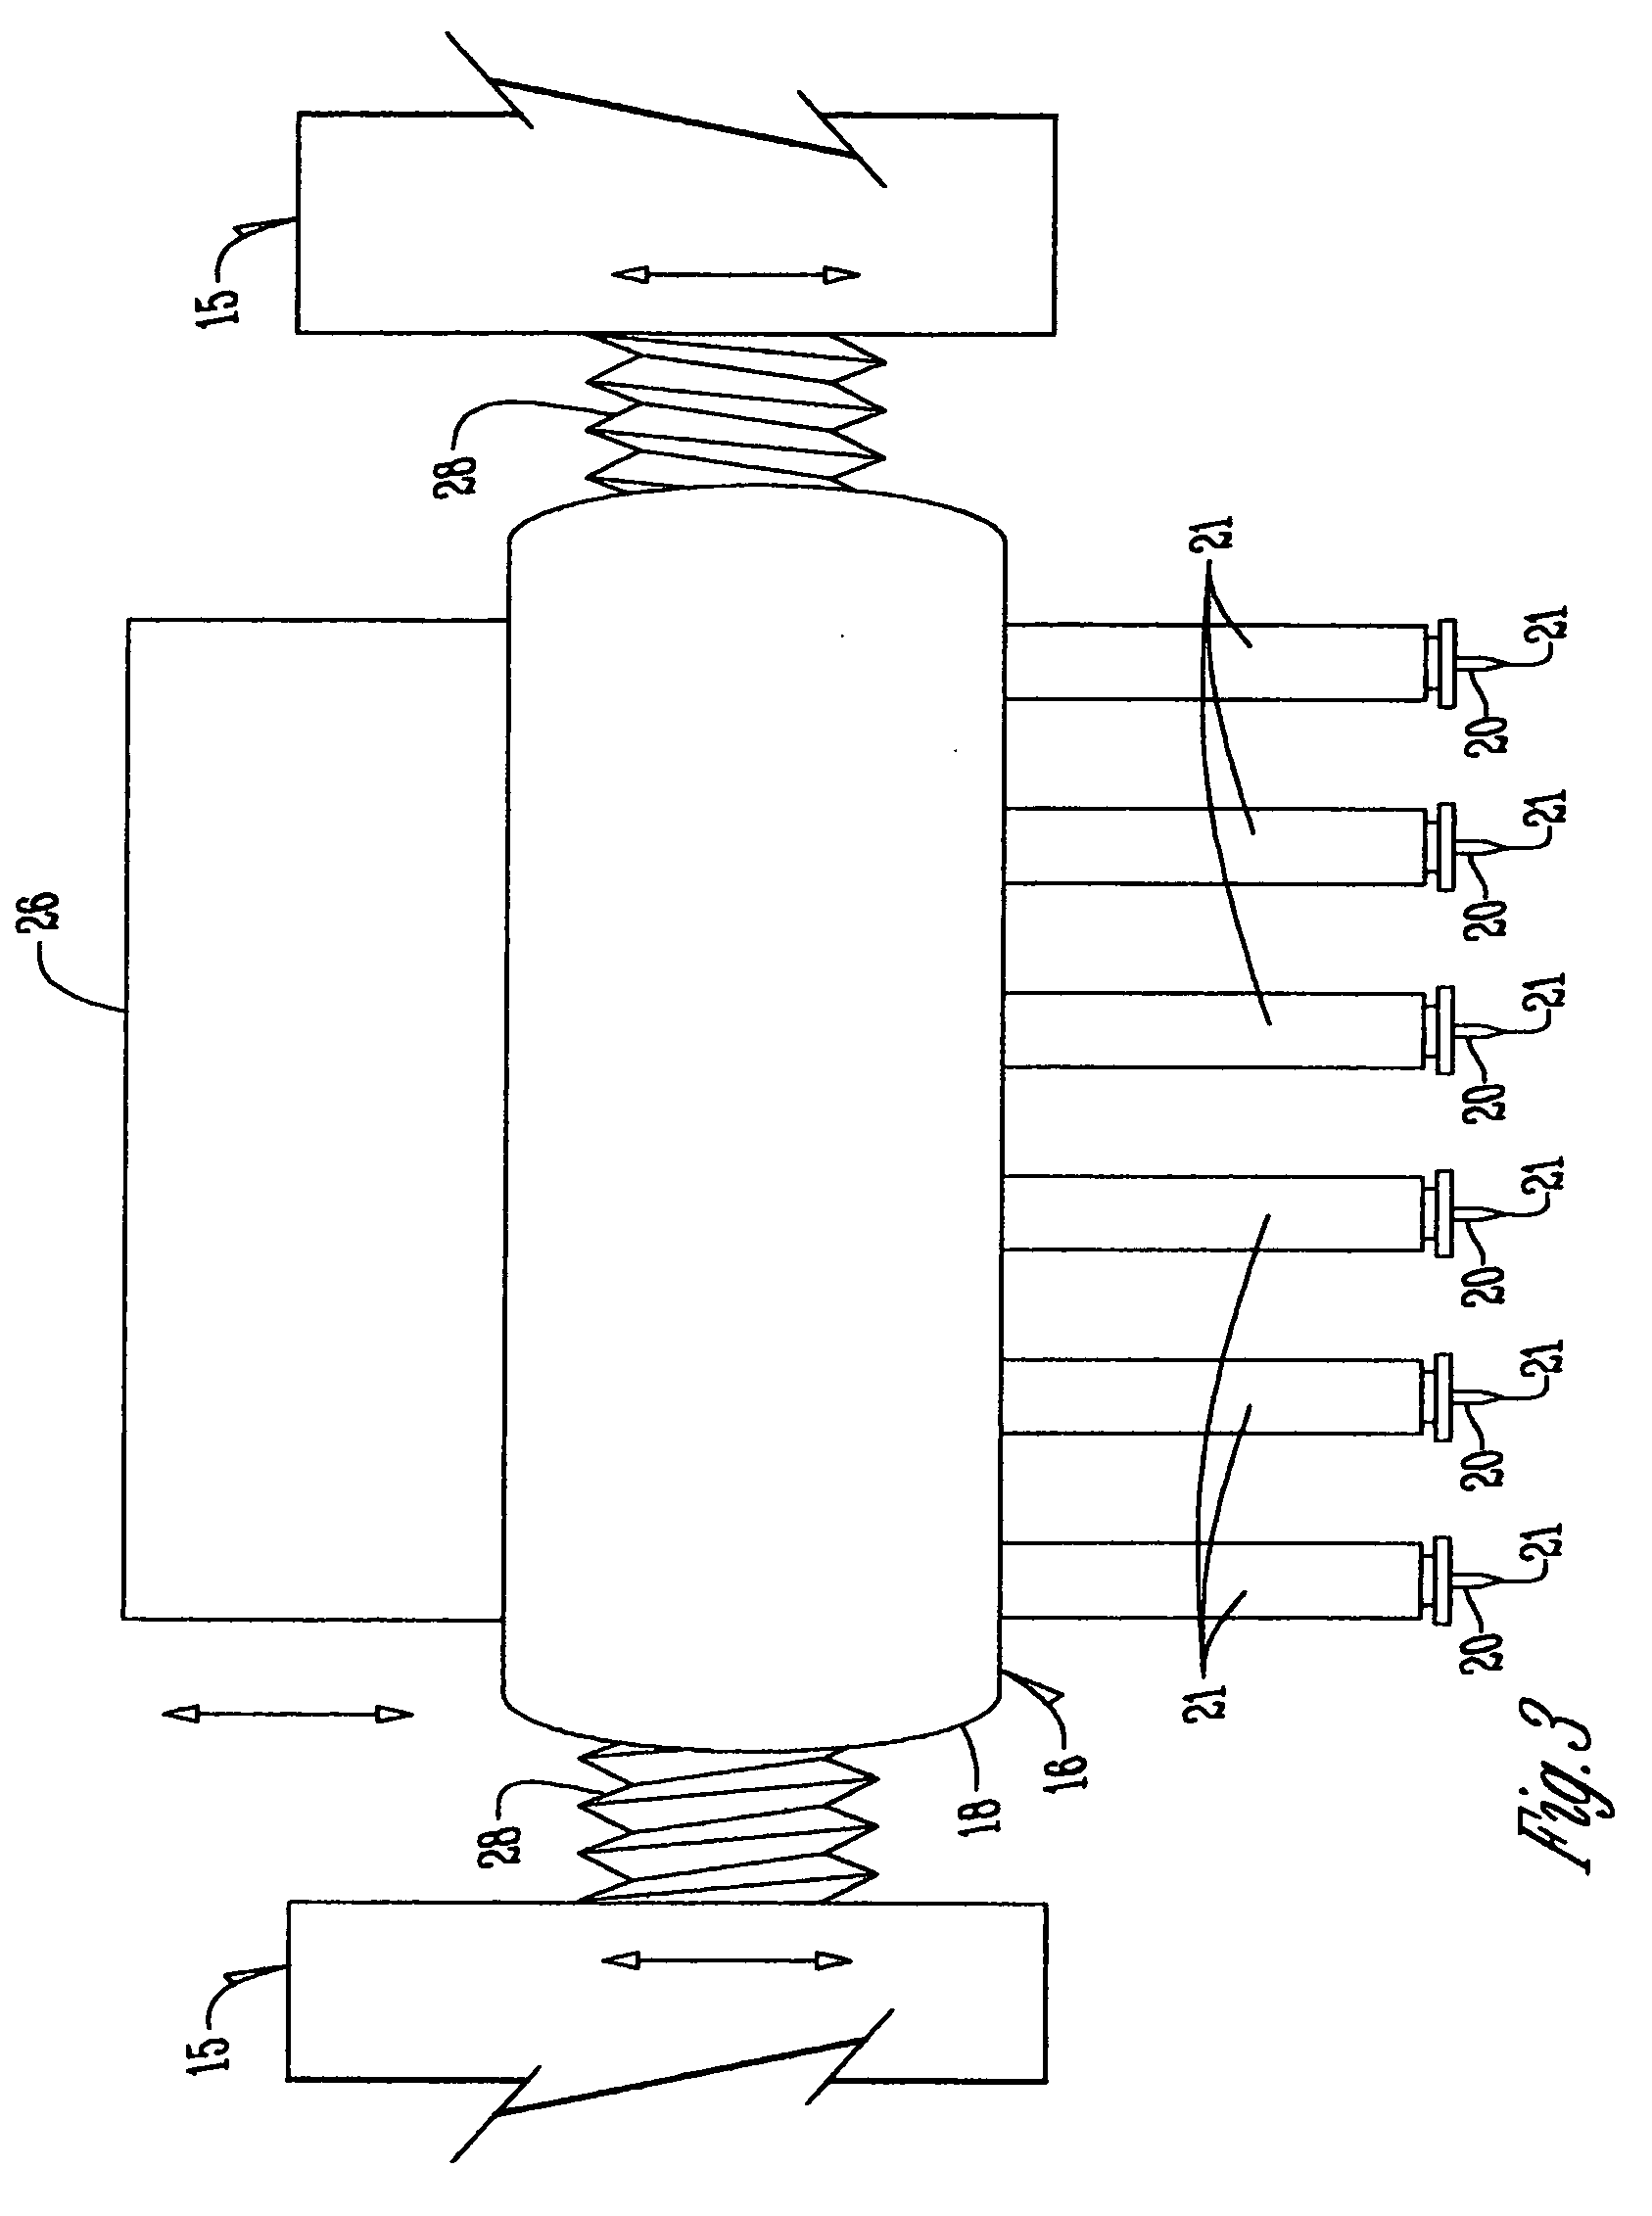 Apparatus for injecting fluid into meat products